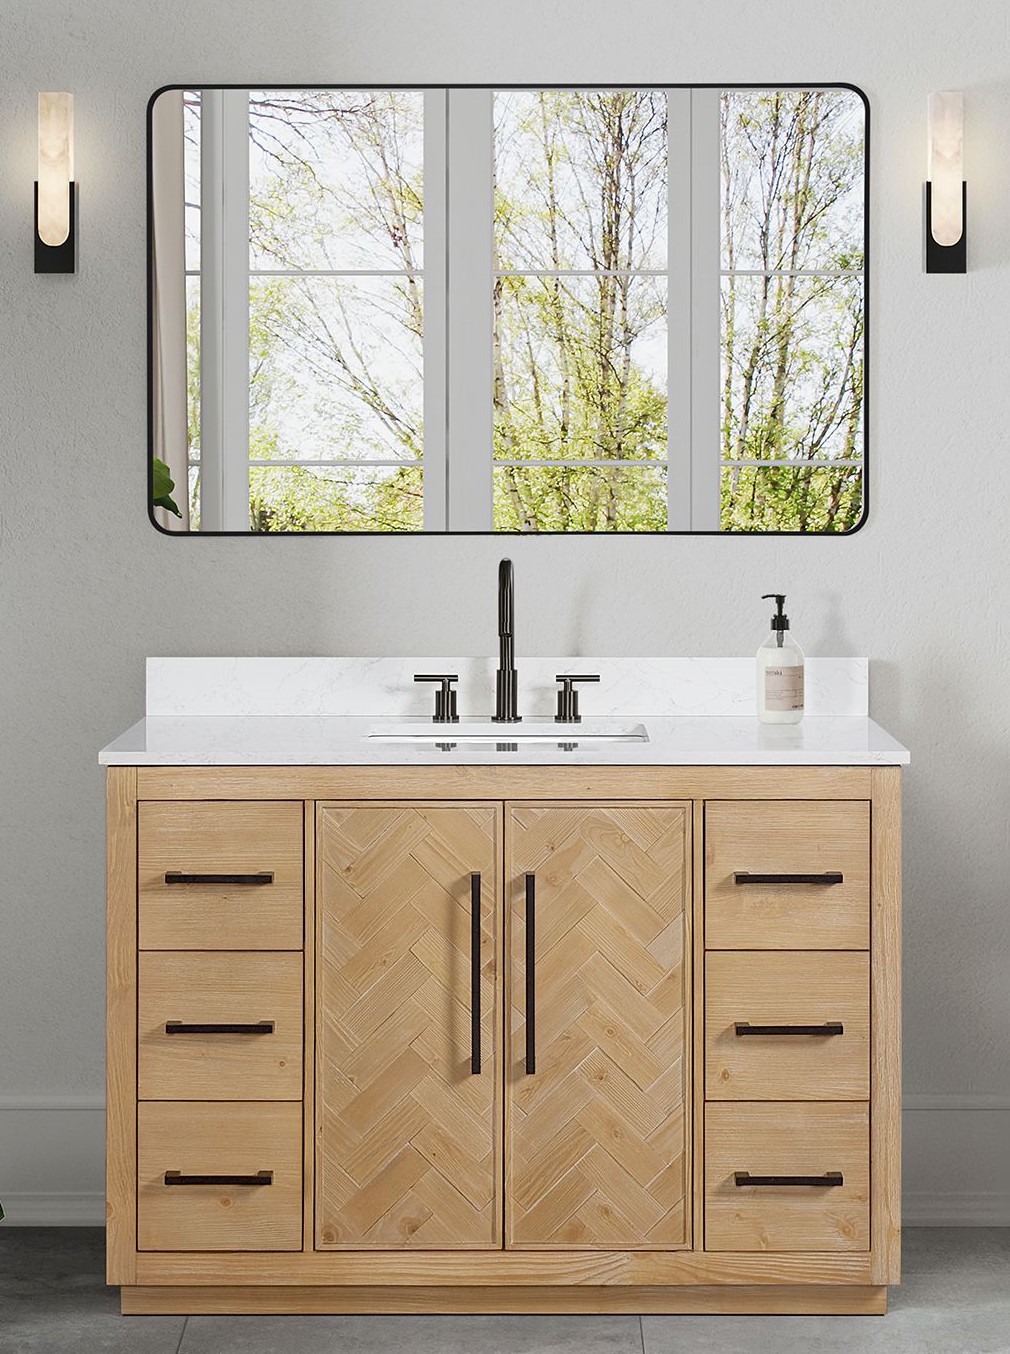 Issac Edwards 48" Single Bathroom Vanity in Weathered Fir with Grain White Engineered Stone Countertop with Mirror